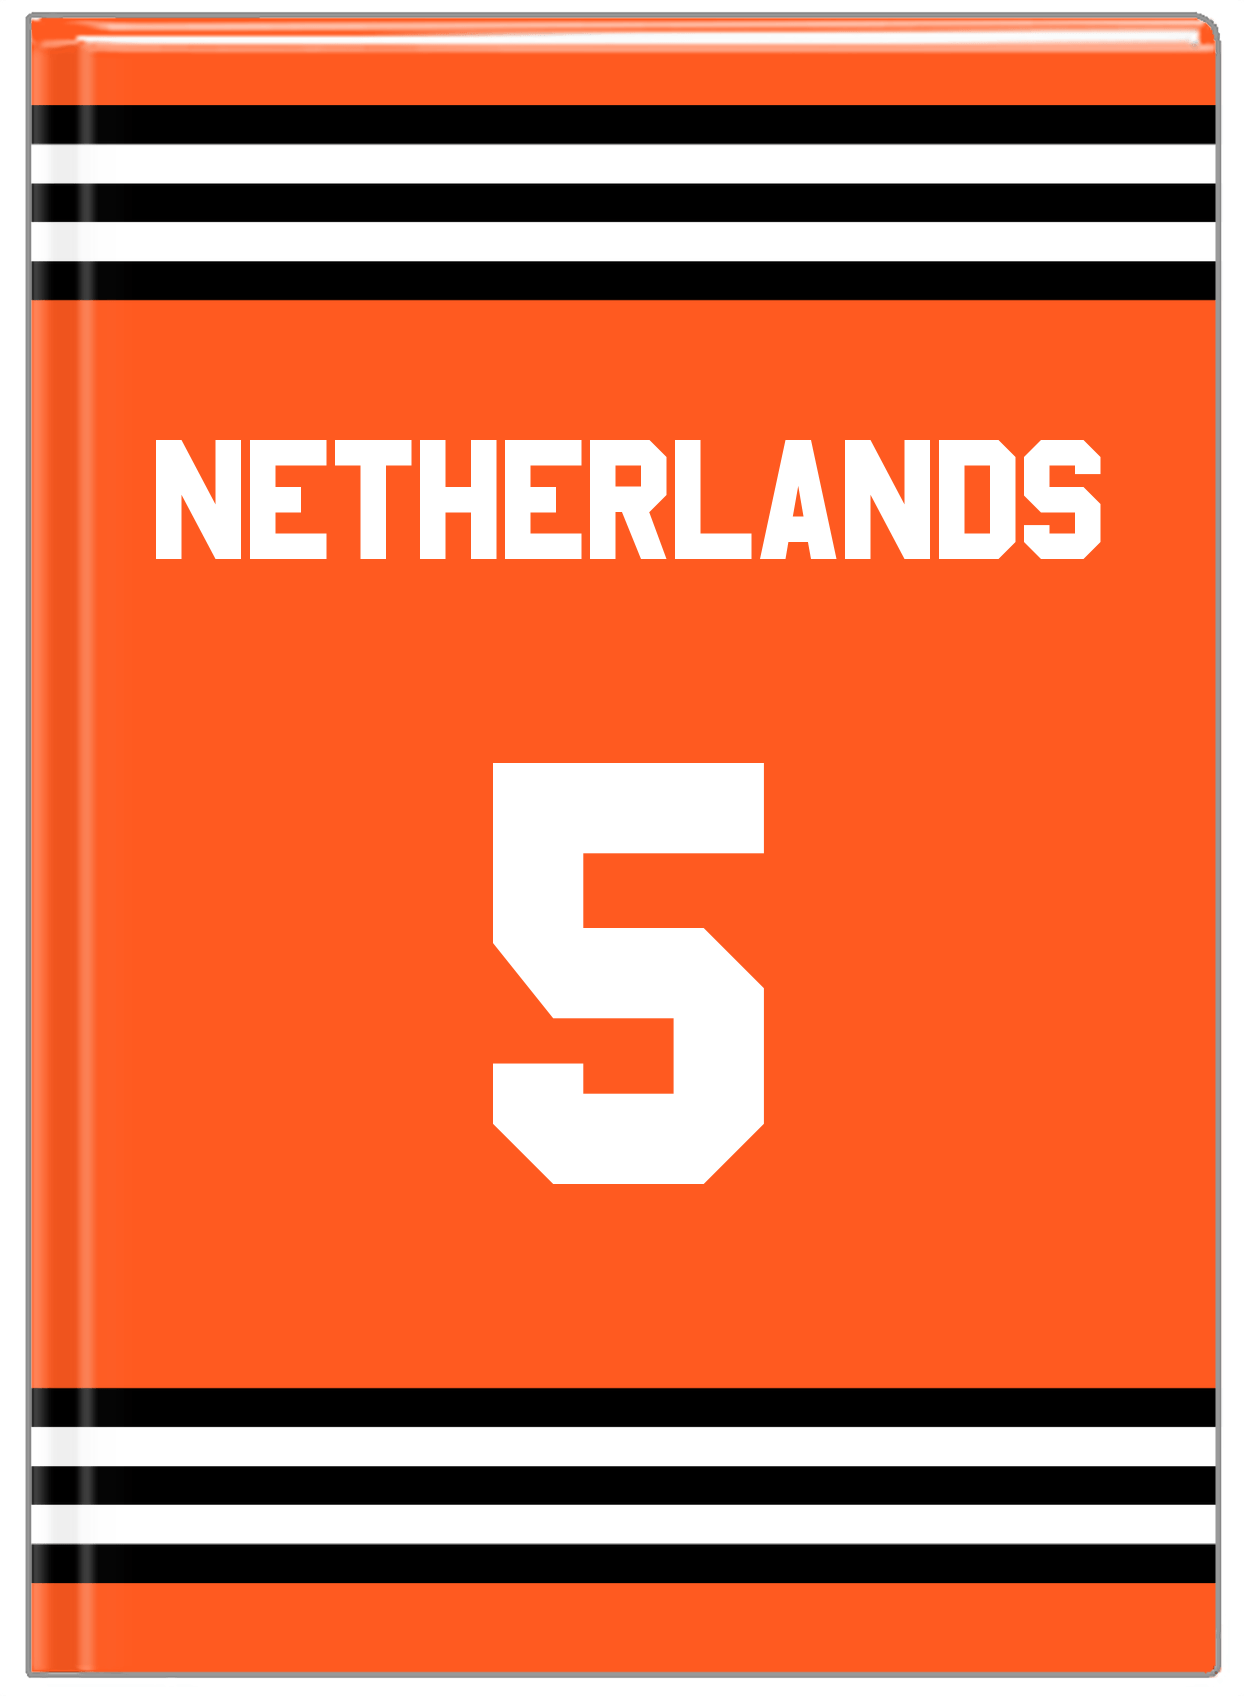 Personalized Jersey Number Journal - Netherlands - Double Stripe - Front View